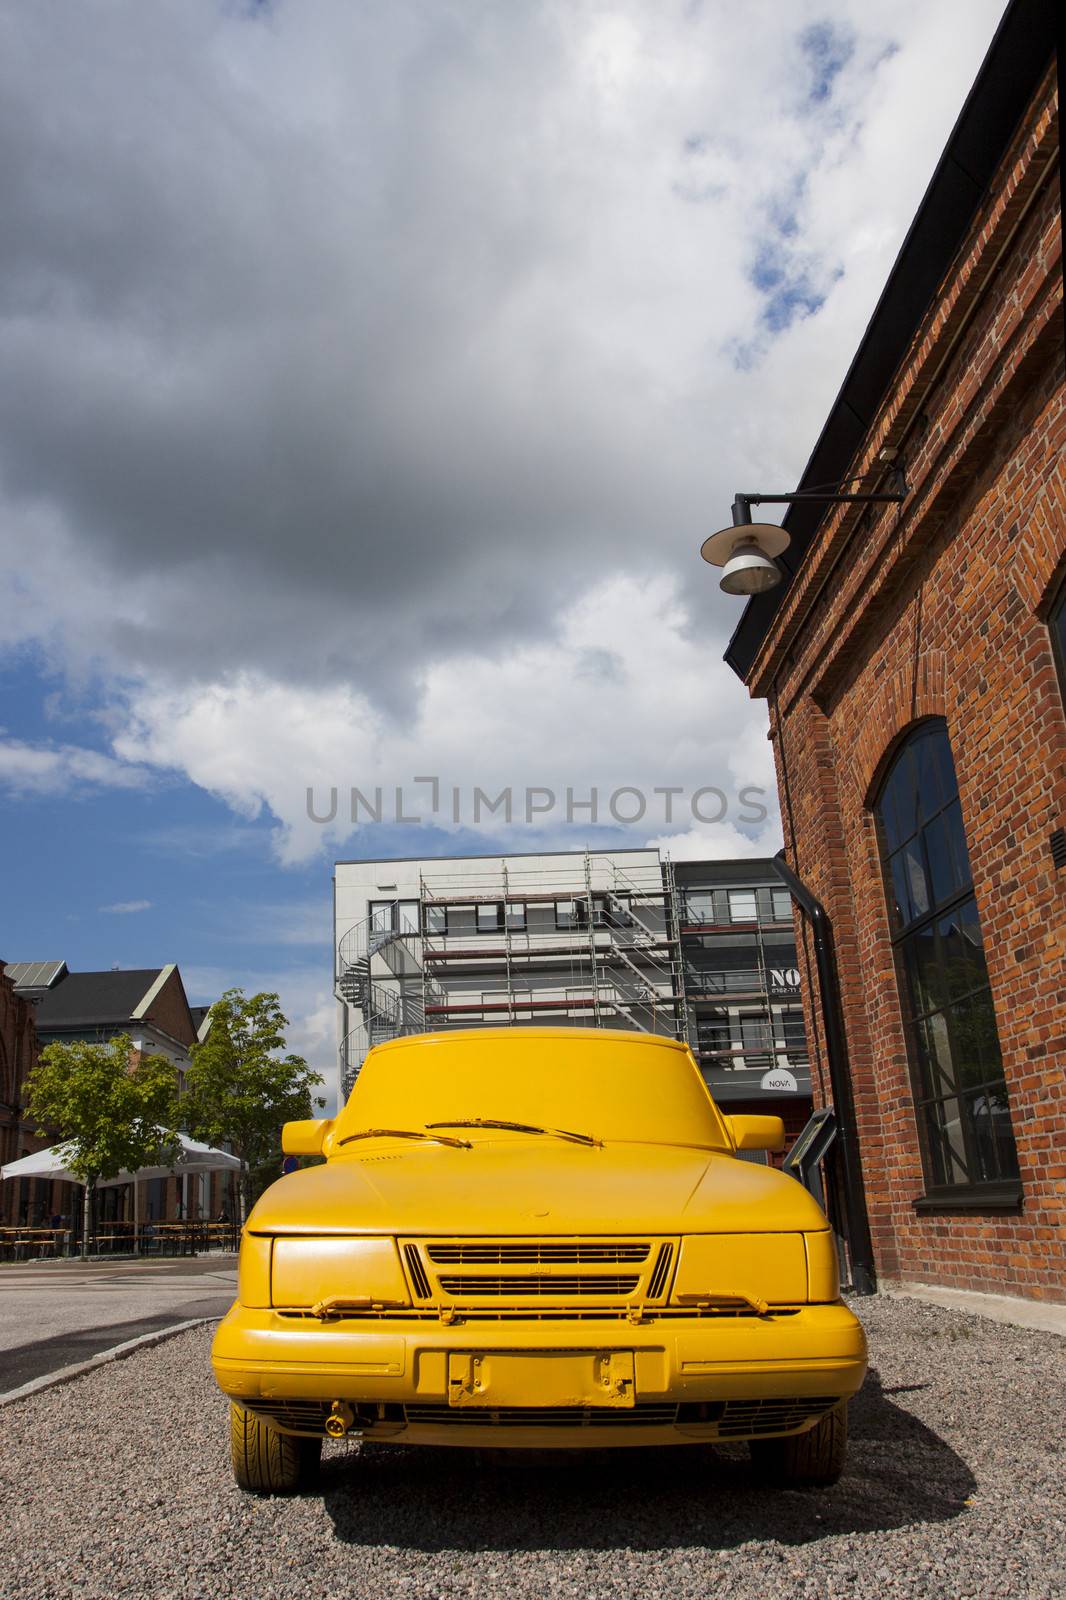 A car painted yellow for art by annems